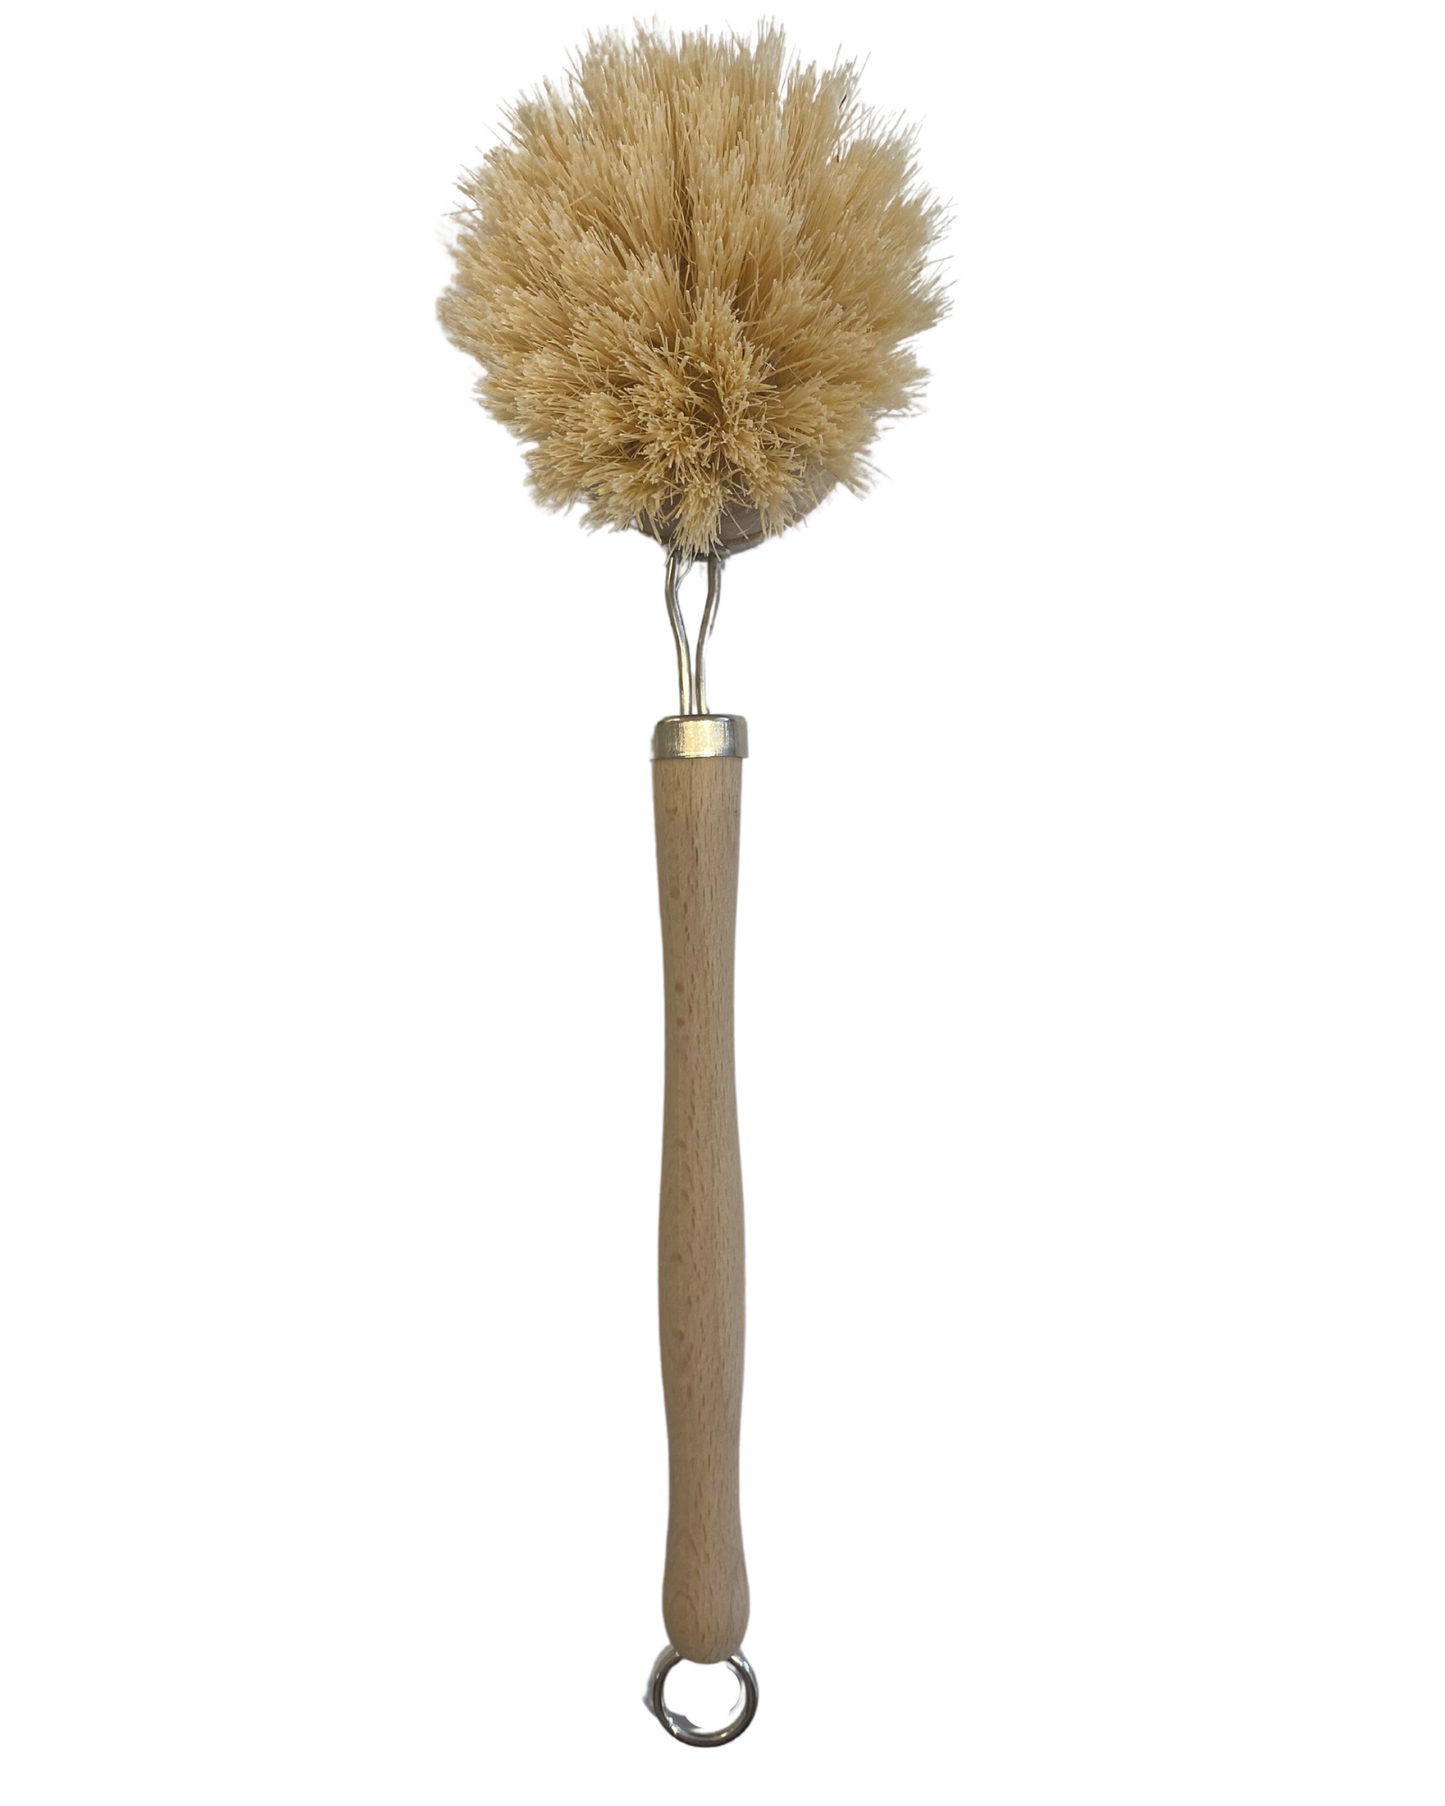 Kitchen Brush & Replaceable Head